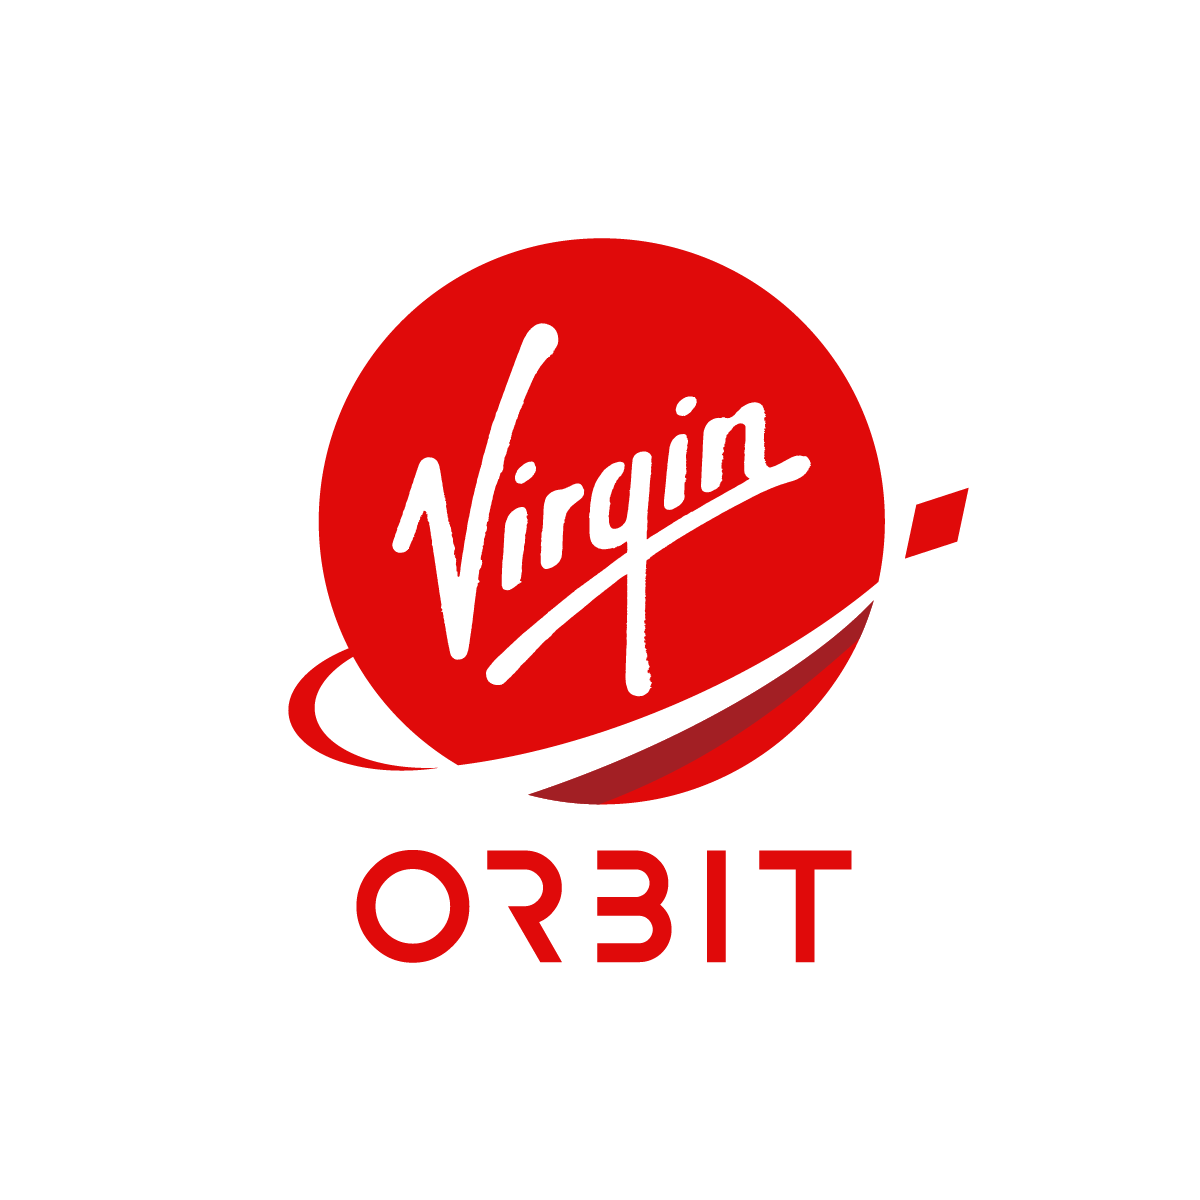 Virgin Orbit Logo of a red circle with a red diamond flying around it